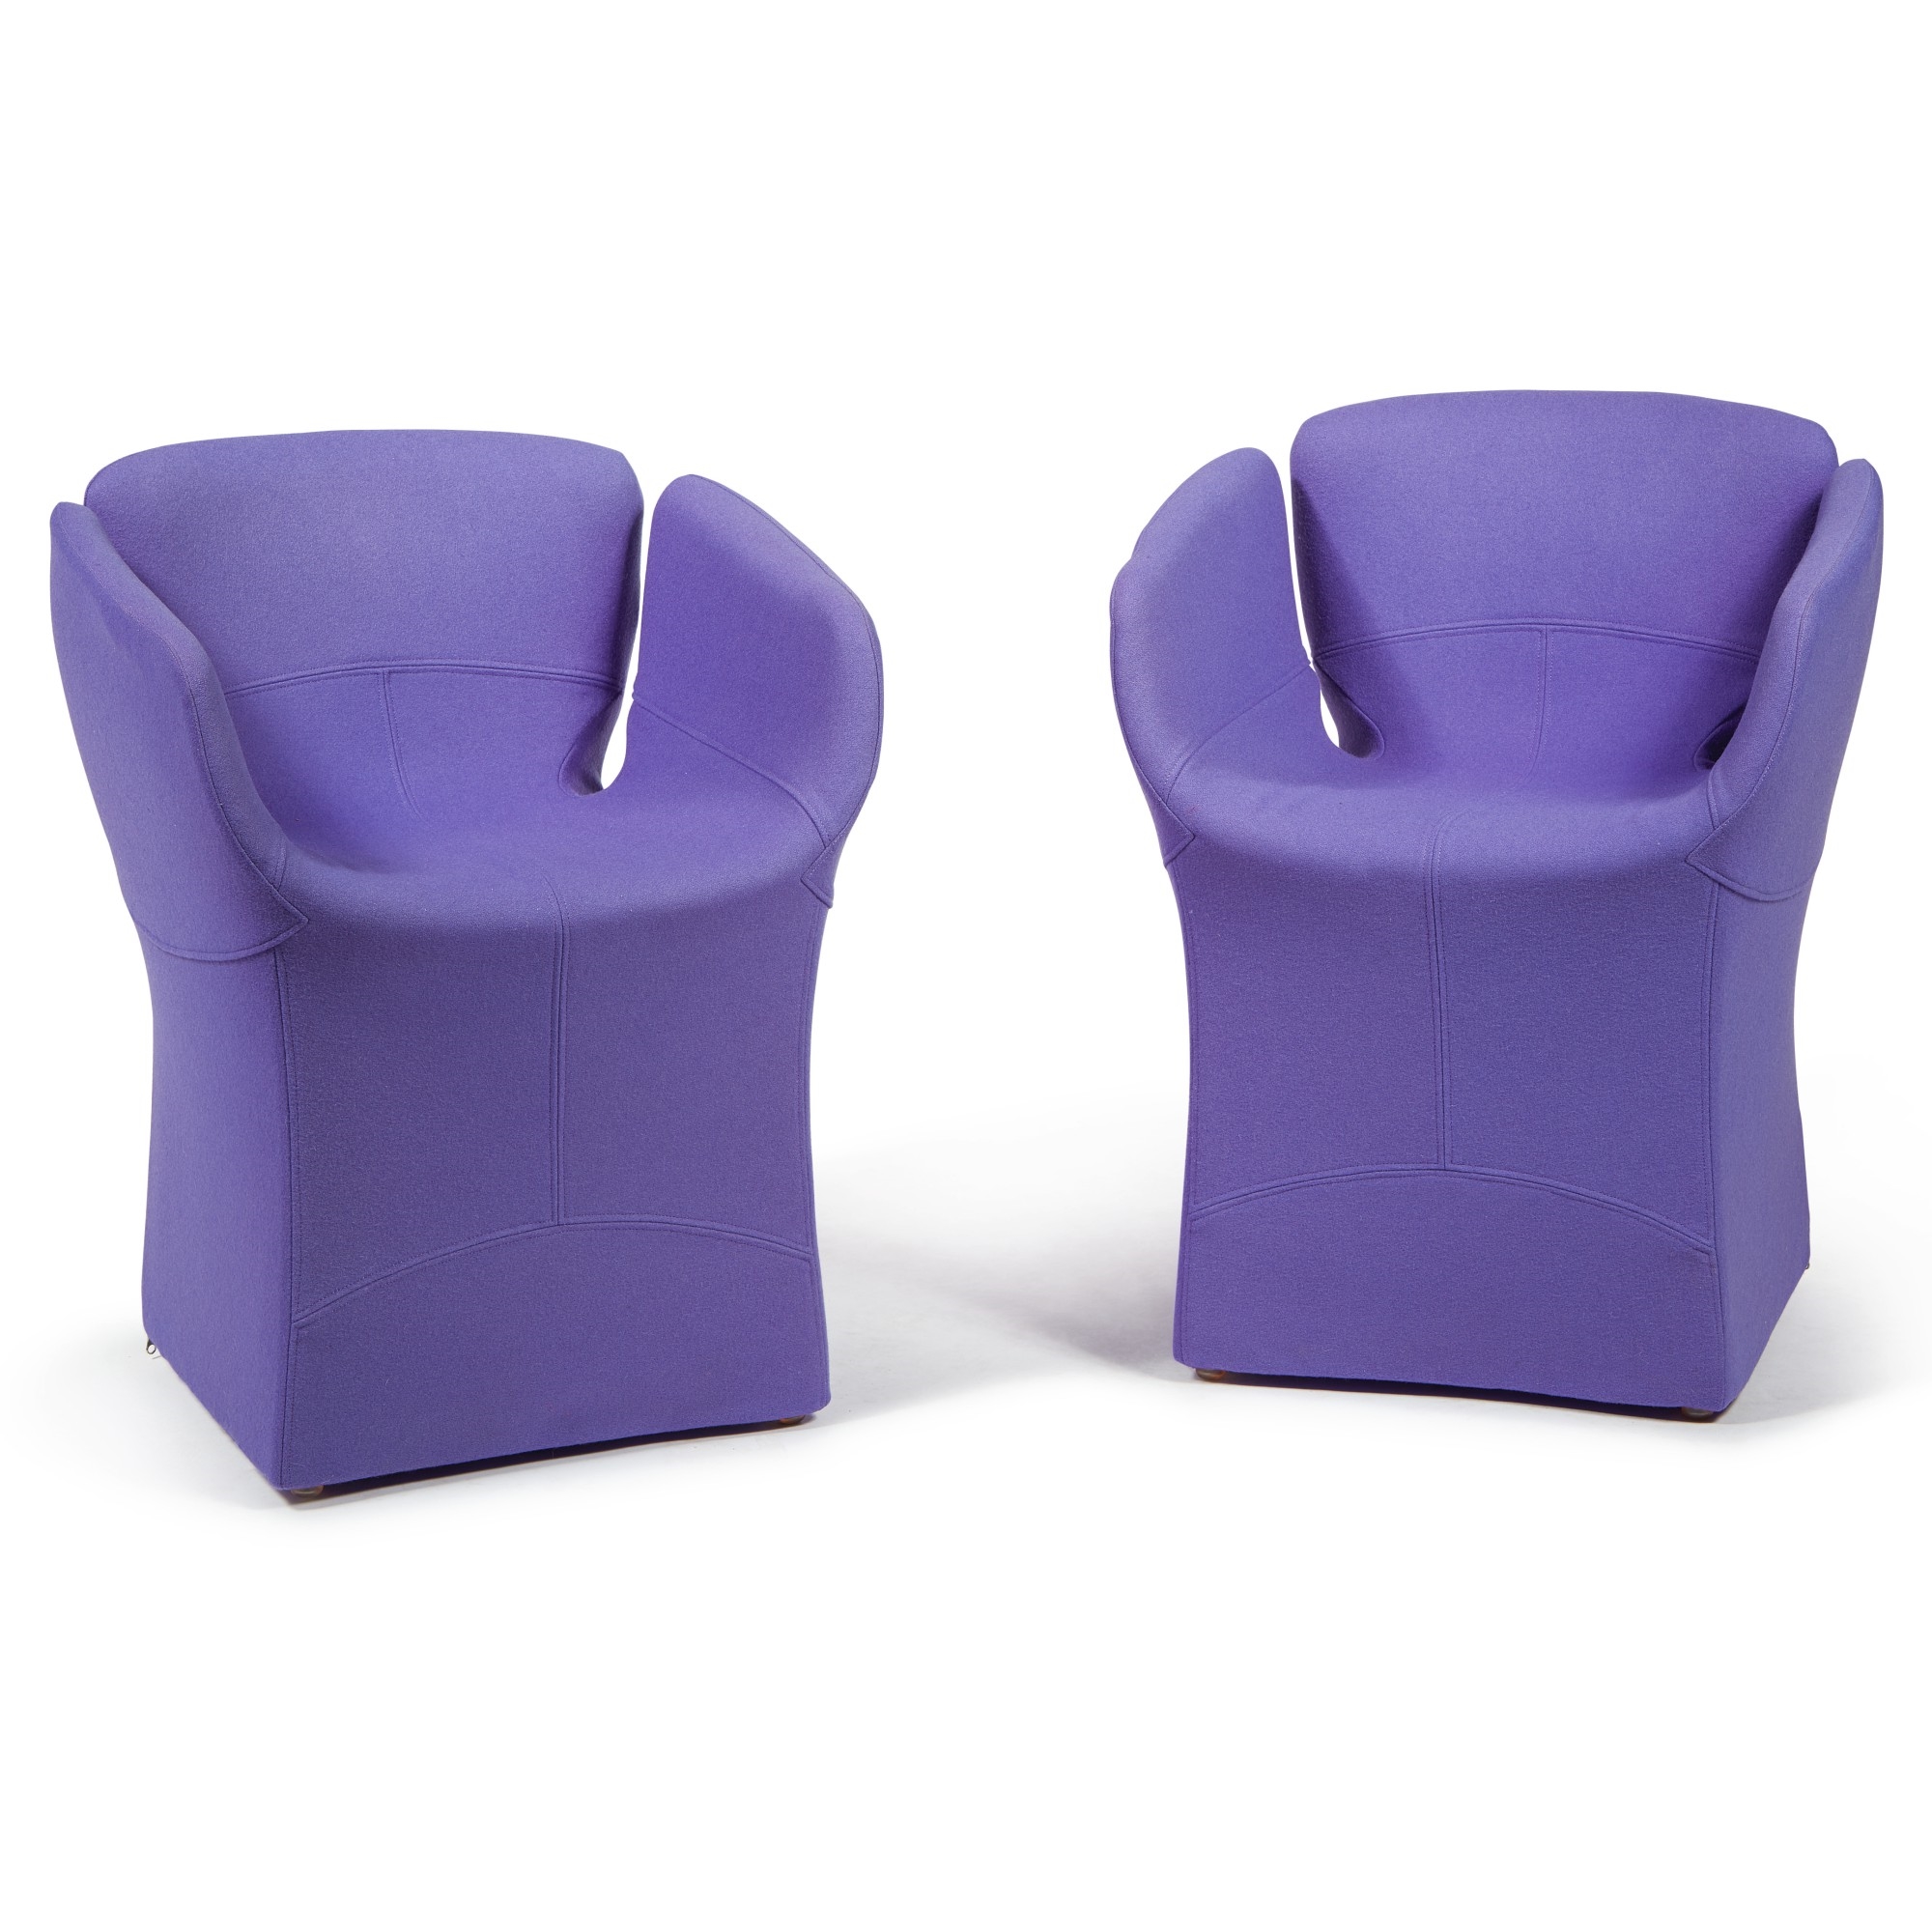 Two Bloomy chairs by Patricia Urquiola for Moroso Italy